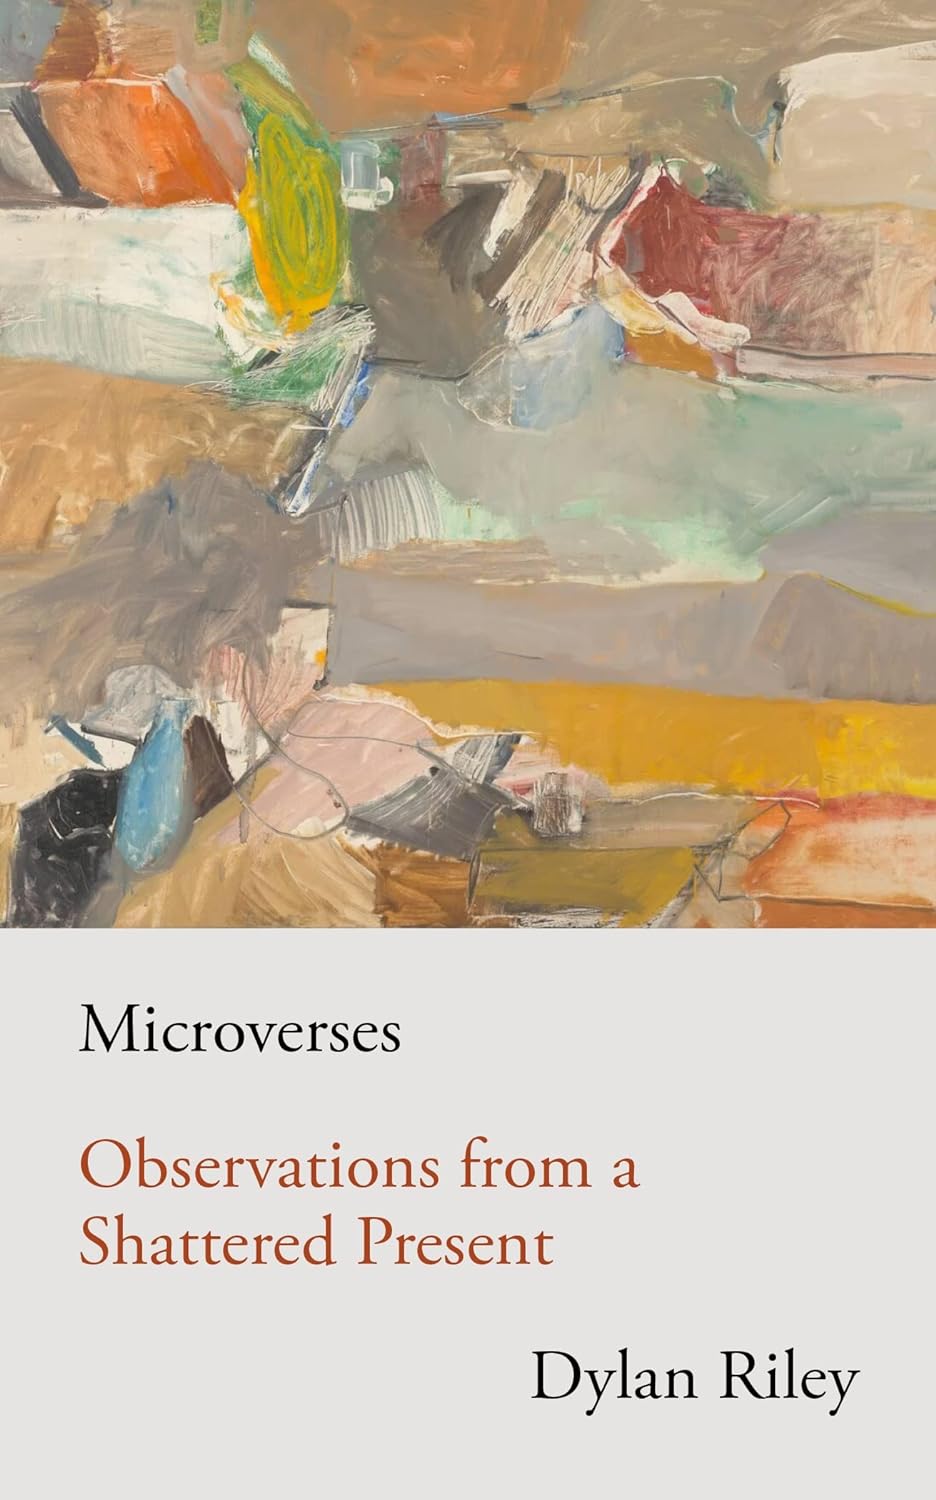 Microverses: Observations from a Shattered Present